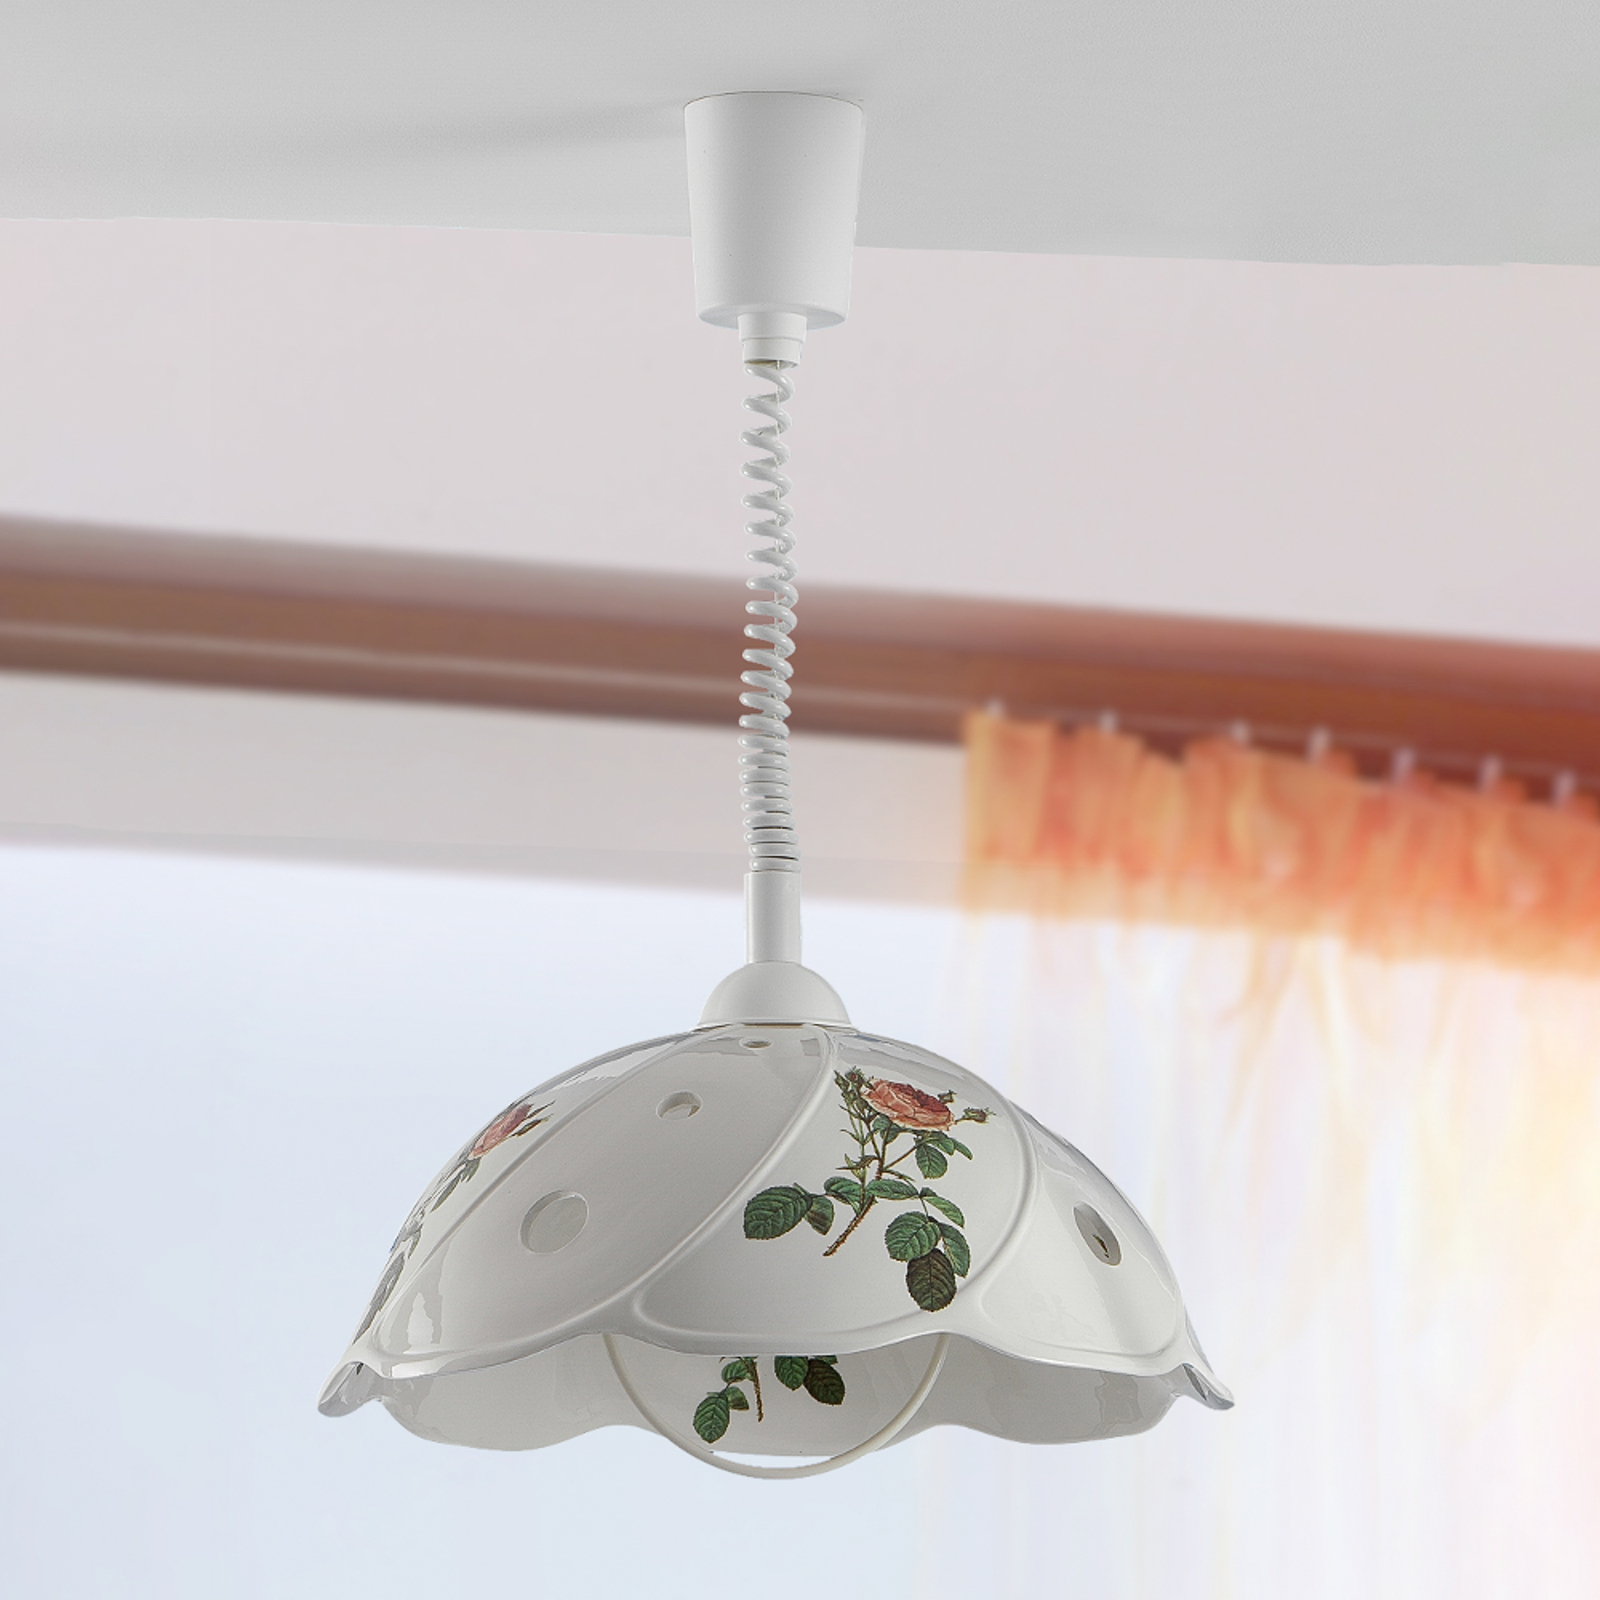 ROSA hanging light with rise and fall mechanism